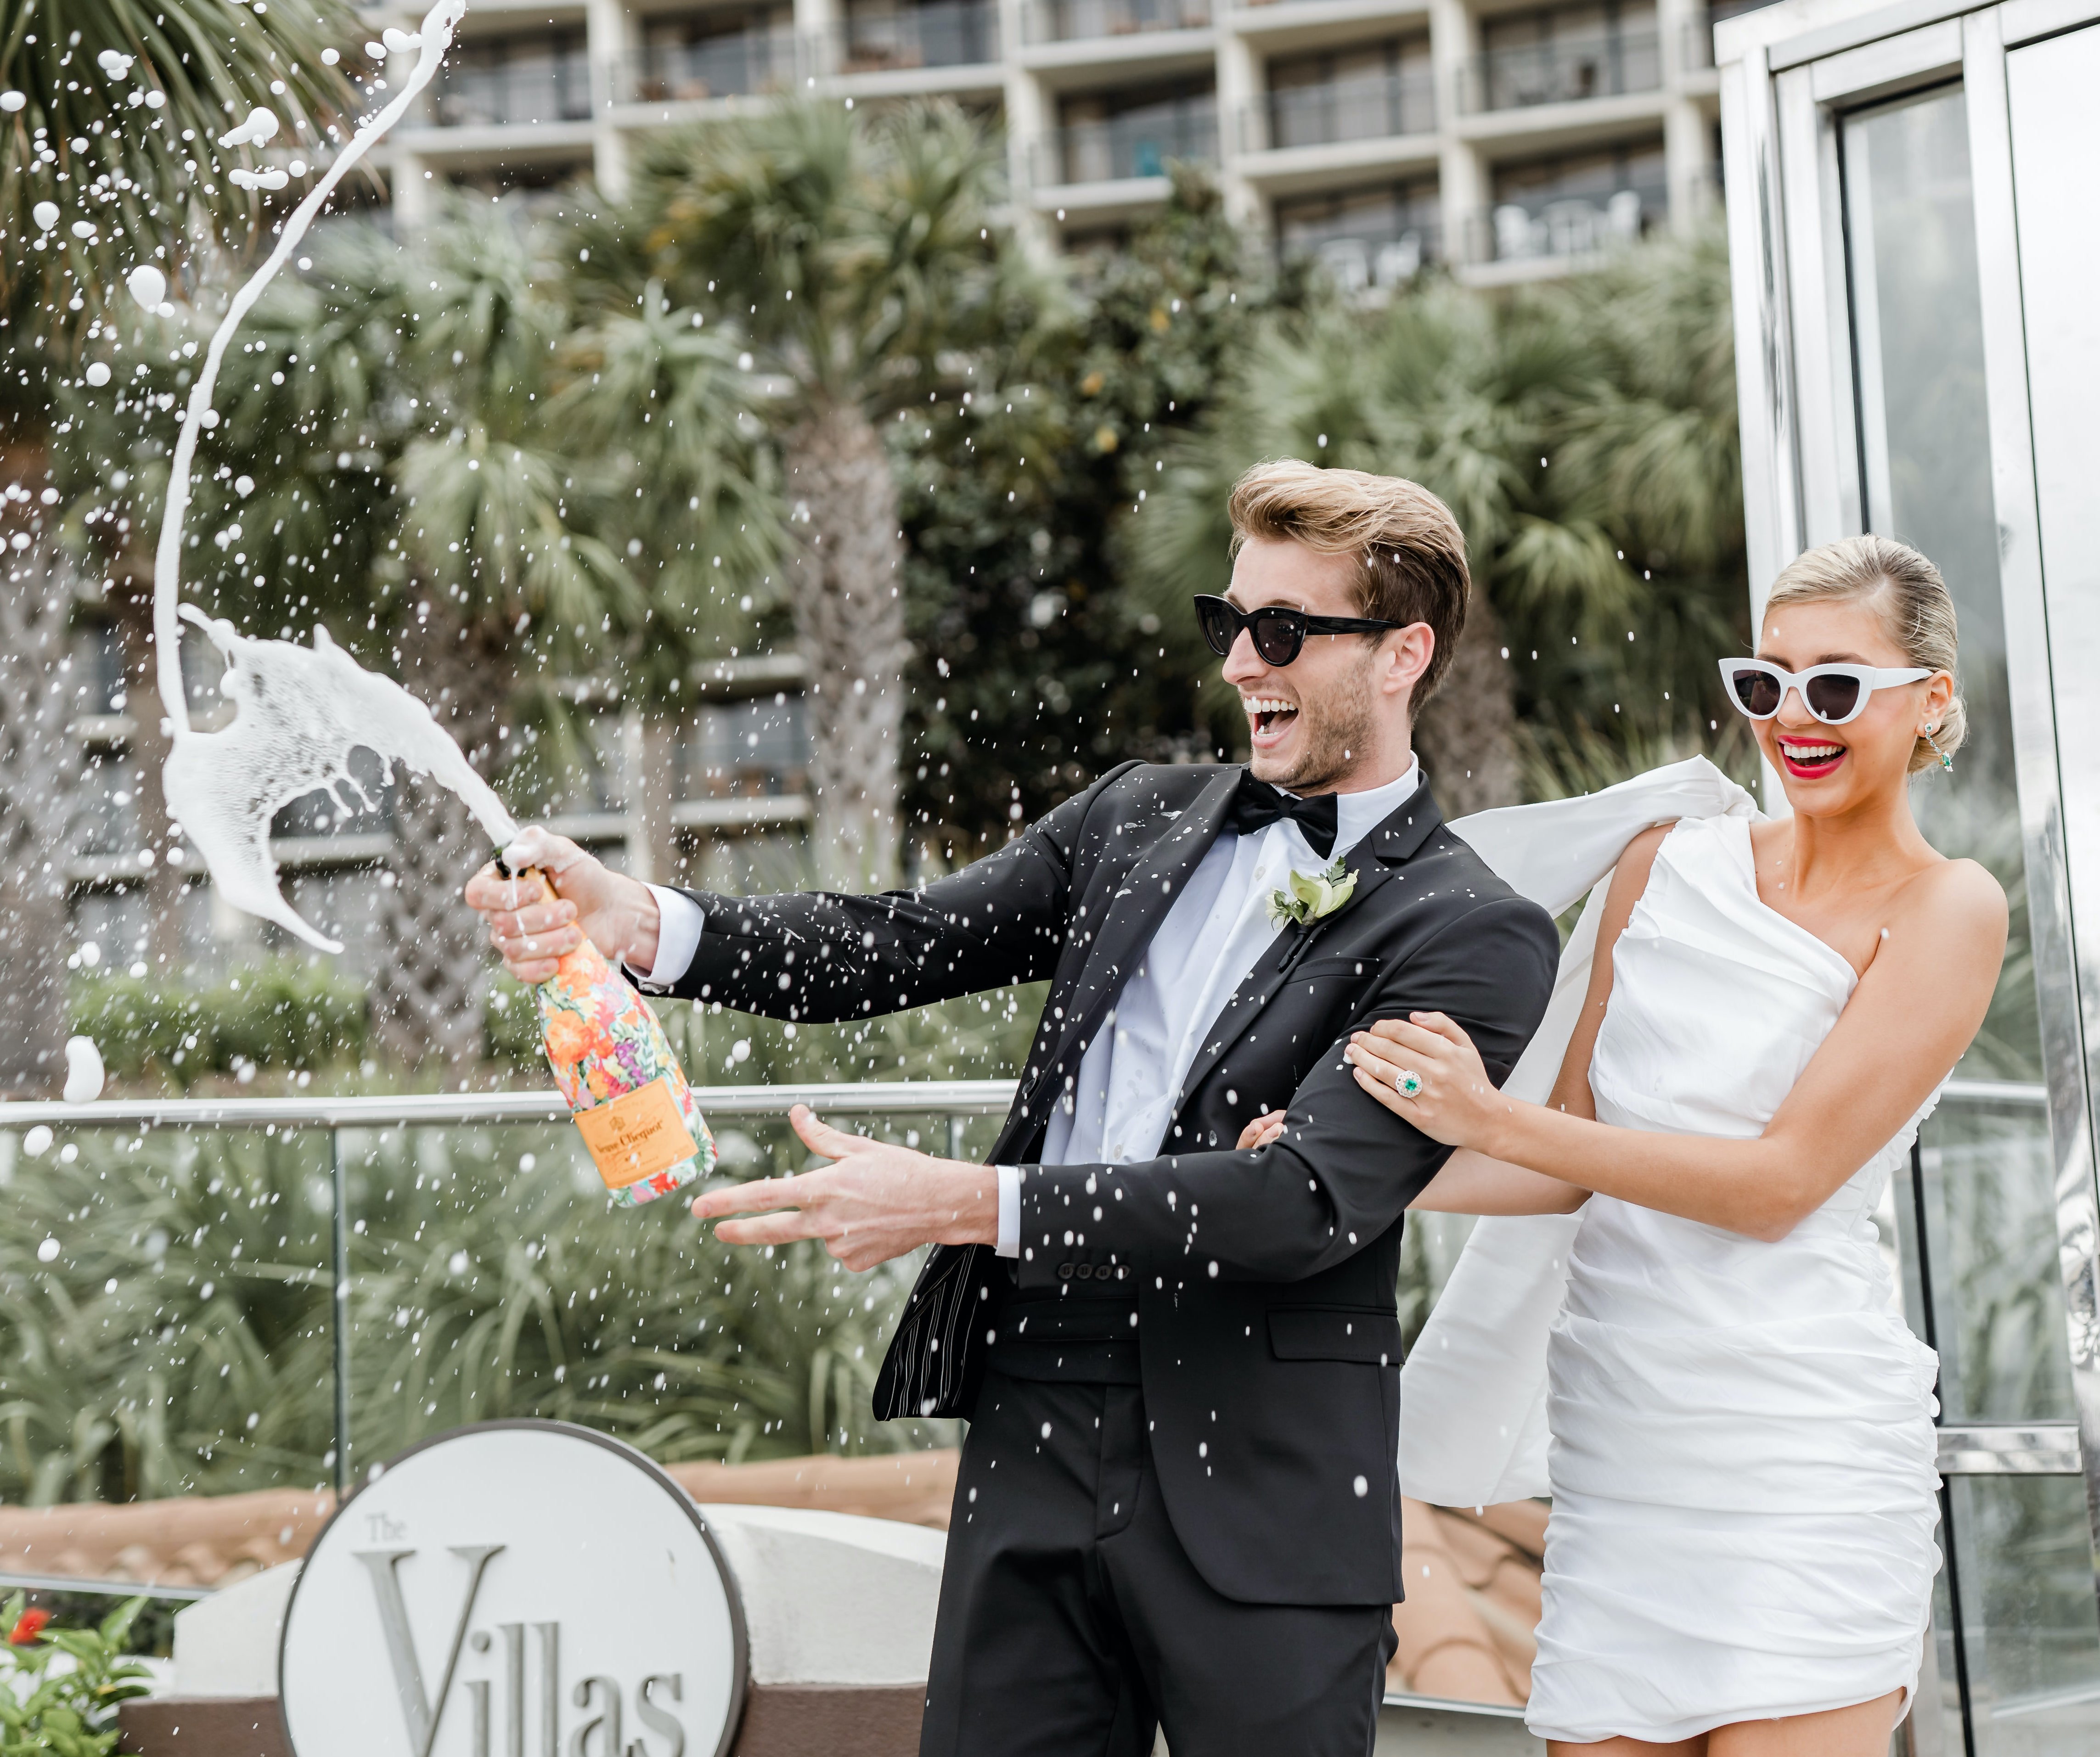 A groom sprays champagne in the air while the bride smiles and watches. They are standing outside at The San Luis Resort, Spa & Conference Center in Galveston, TX.